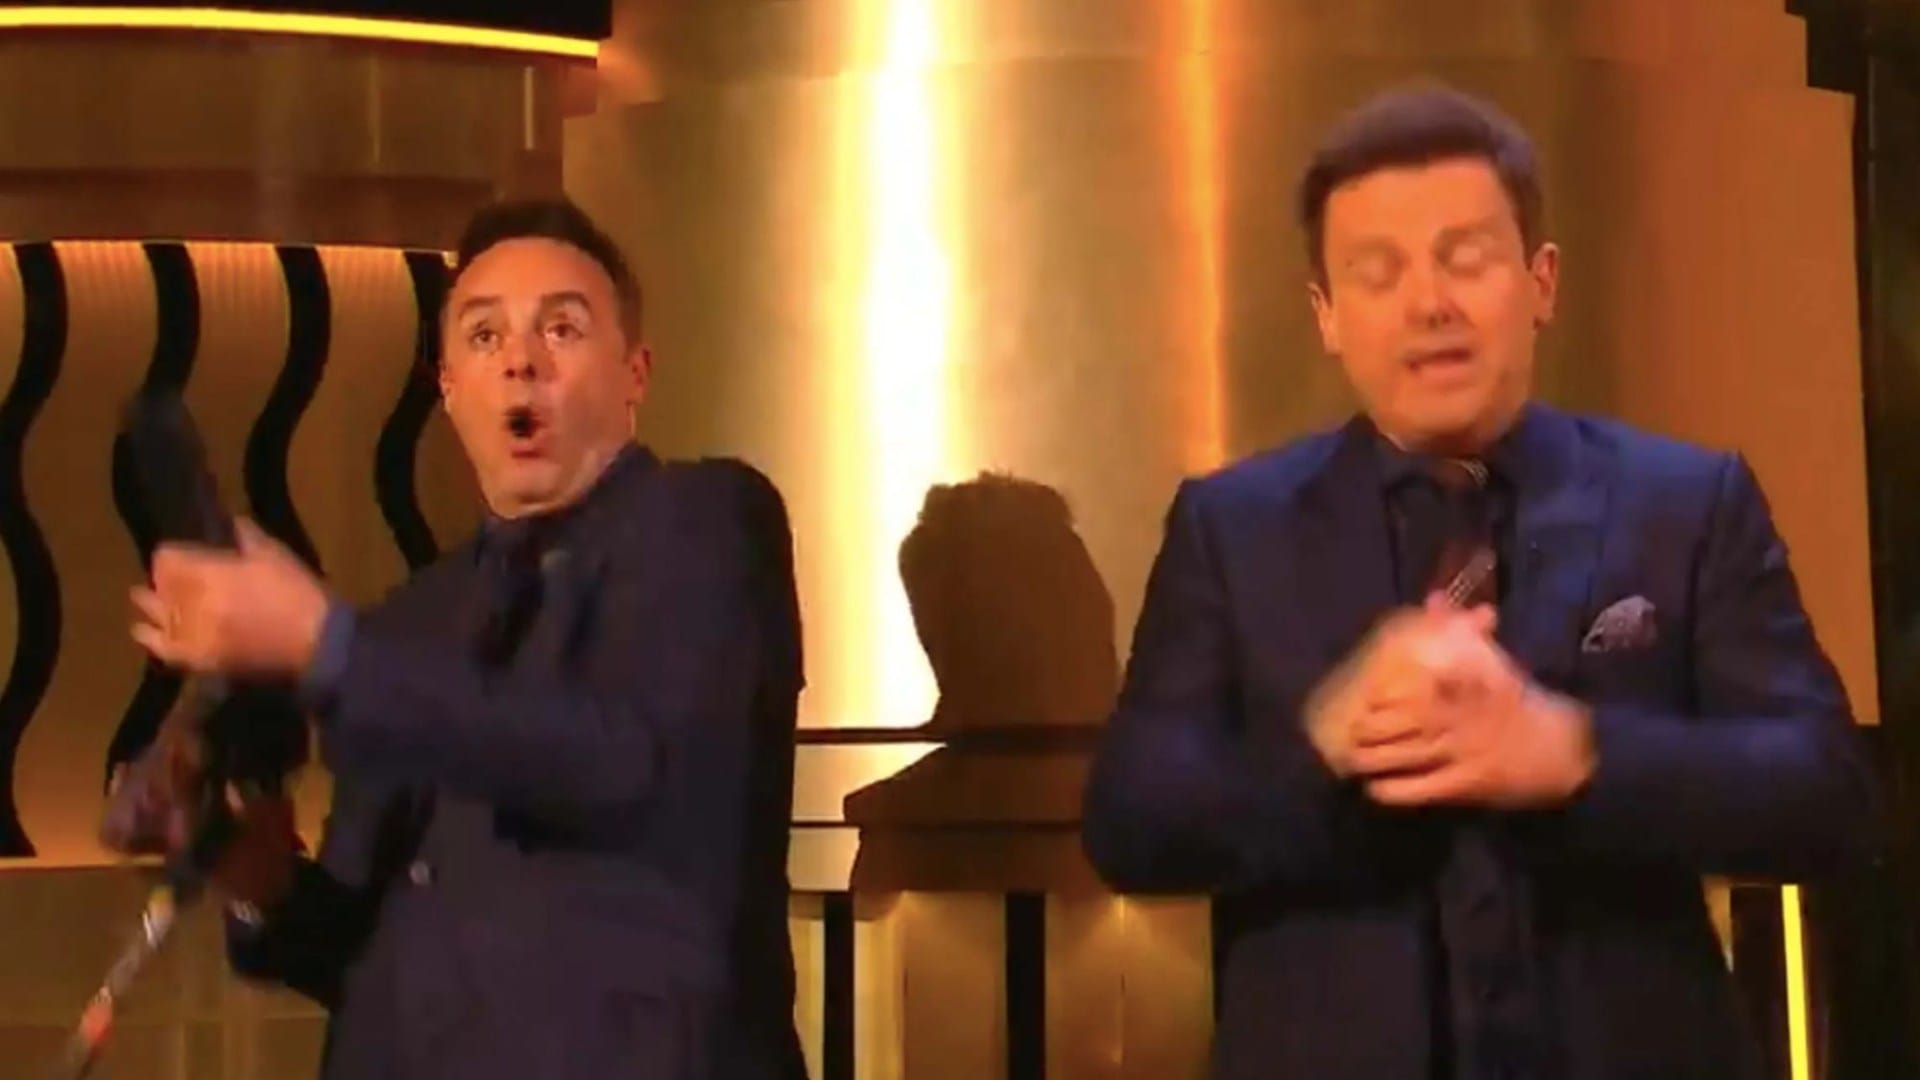 Britain's Got Talent in chaos as Ant McPartlin shocks Dec Donnelly with on-screen blunder